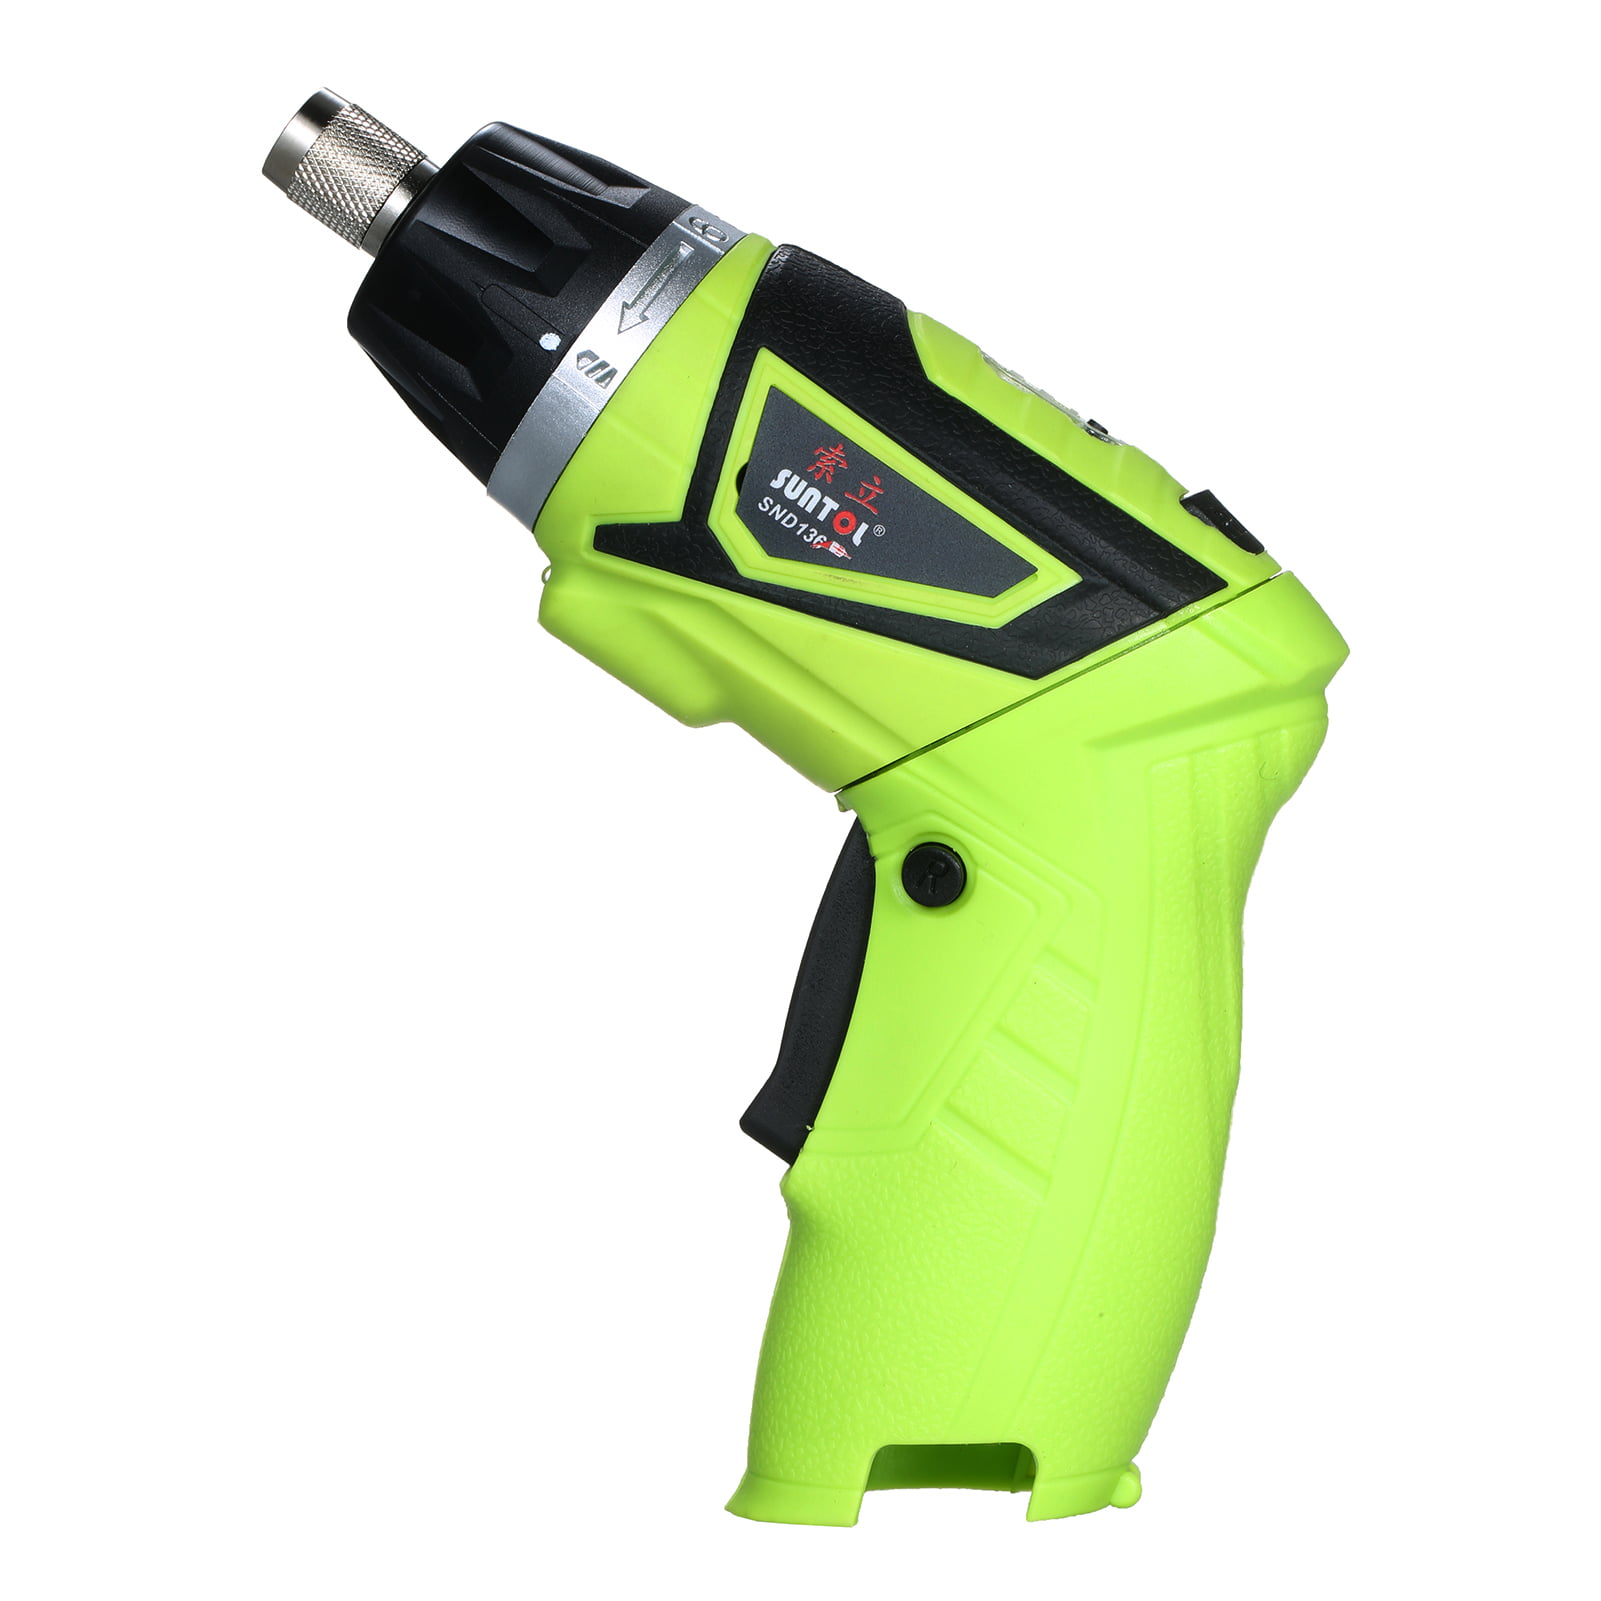 LANNERET 3.6 Volt 1500mAh Li-ion Rechargeable Cordless Electric Screwdriver with 2 Adjustable Position Handle,8+1 Torque Gears,Set In-built with Flashlight,Front LED,Green 